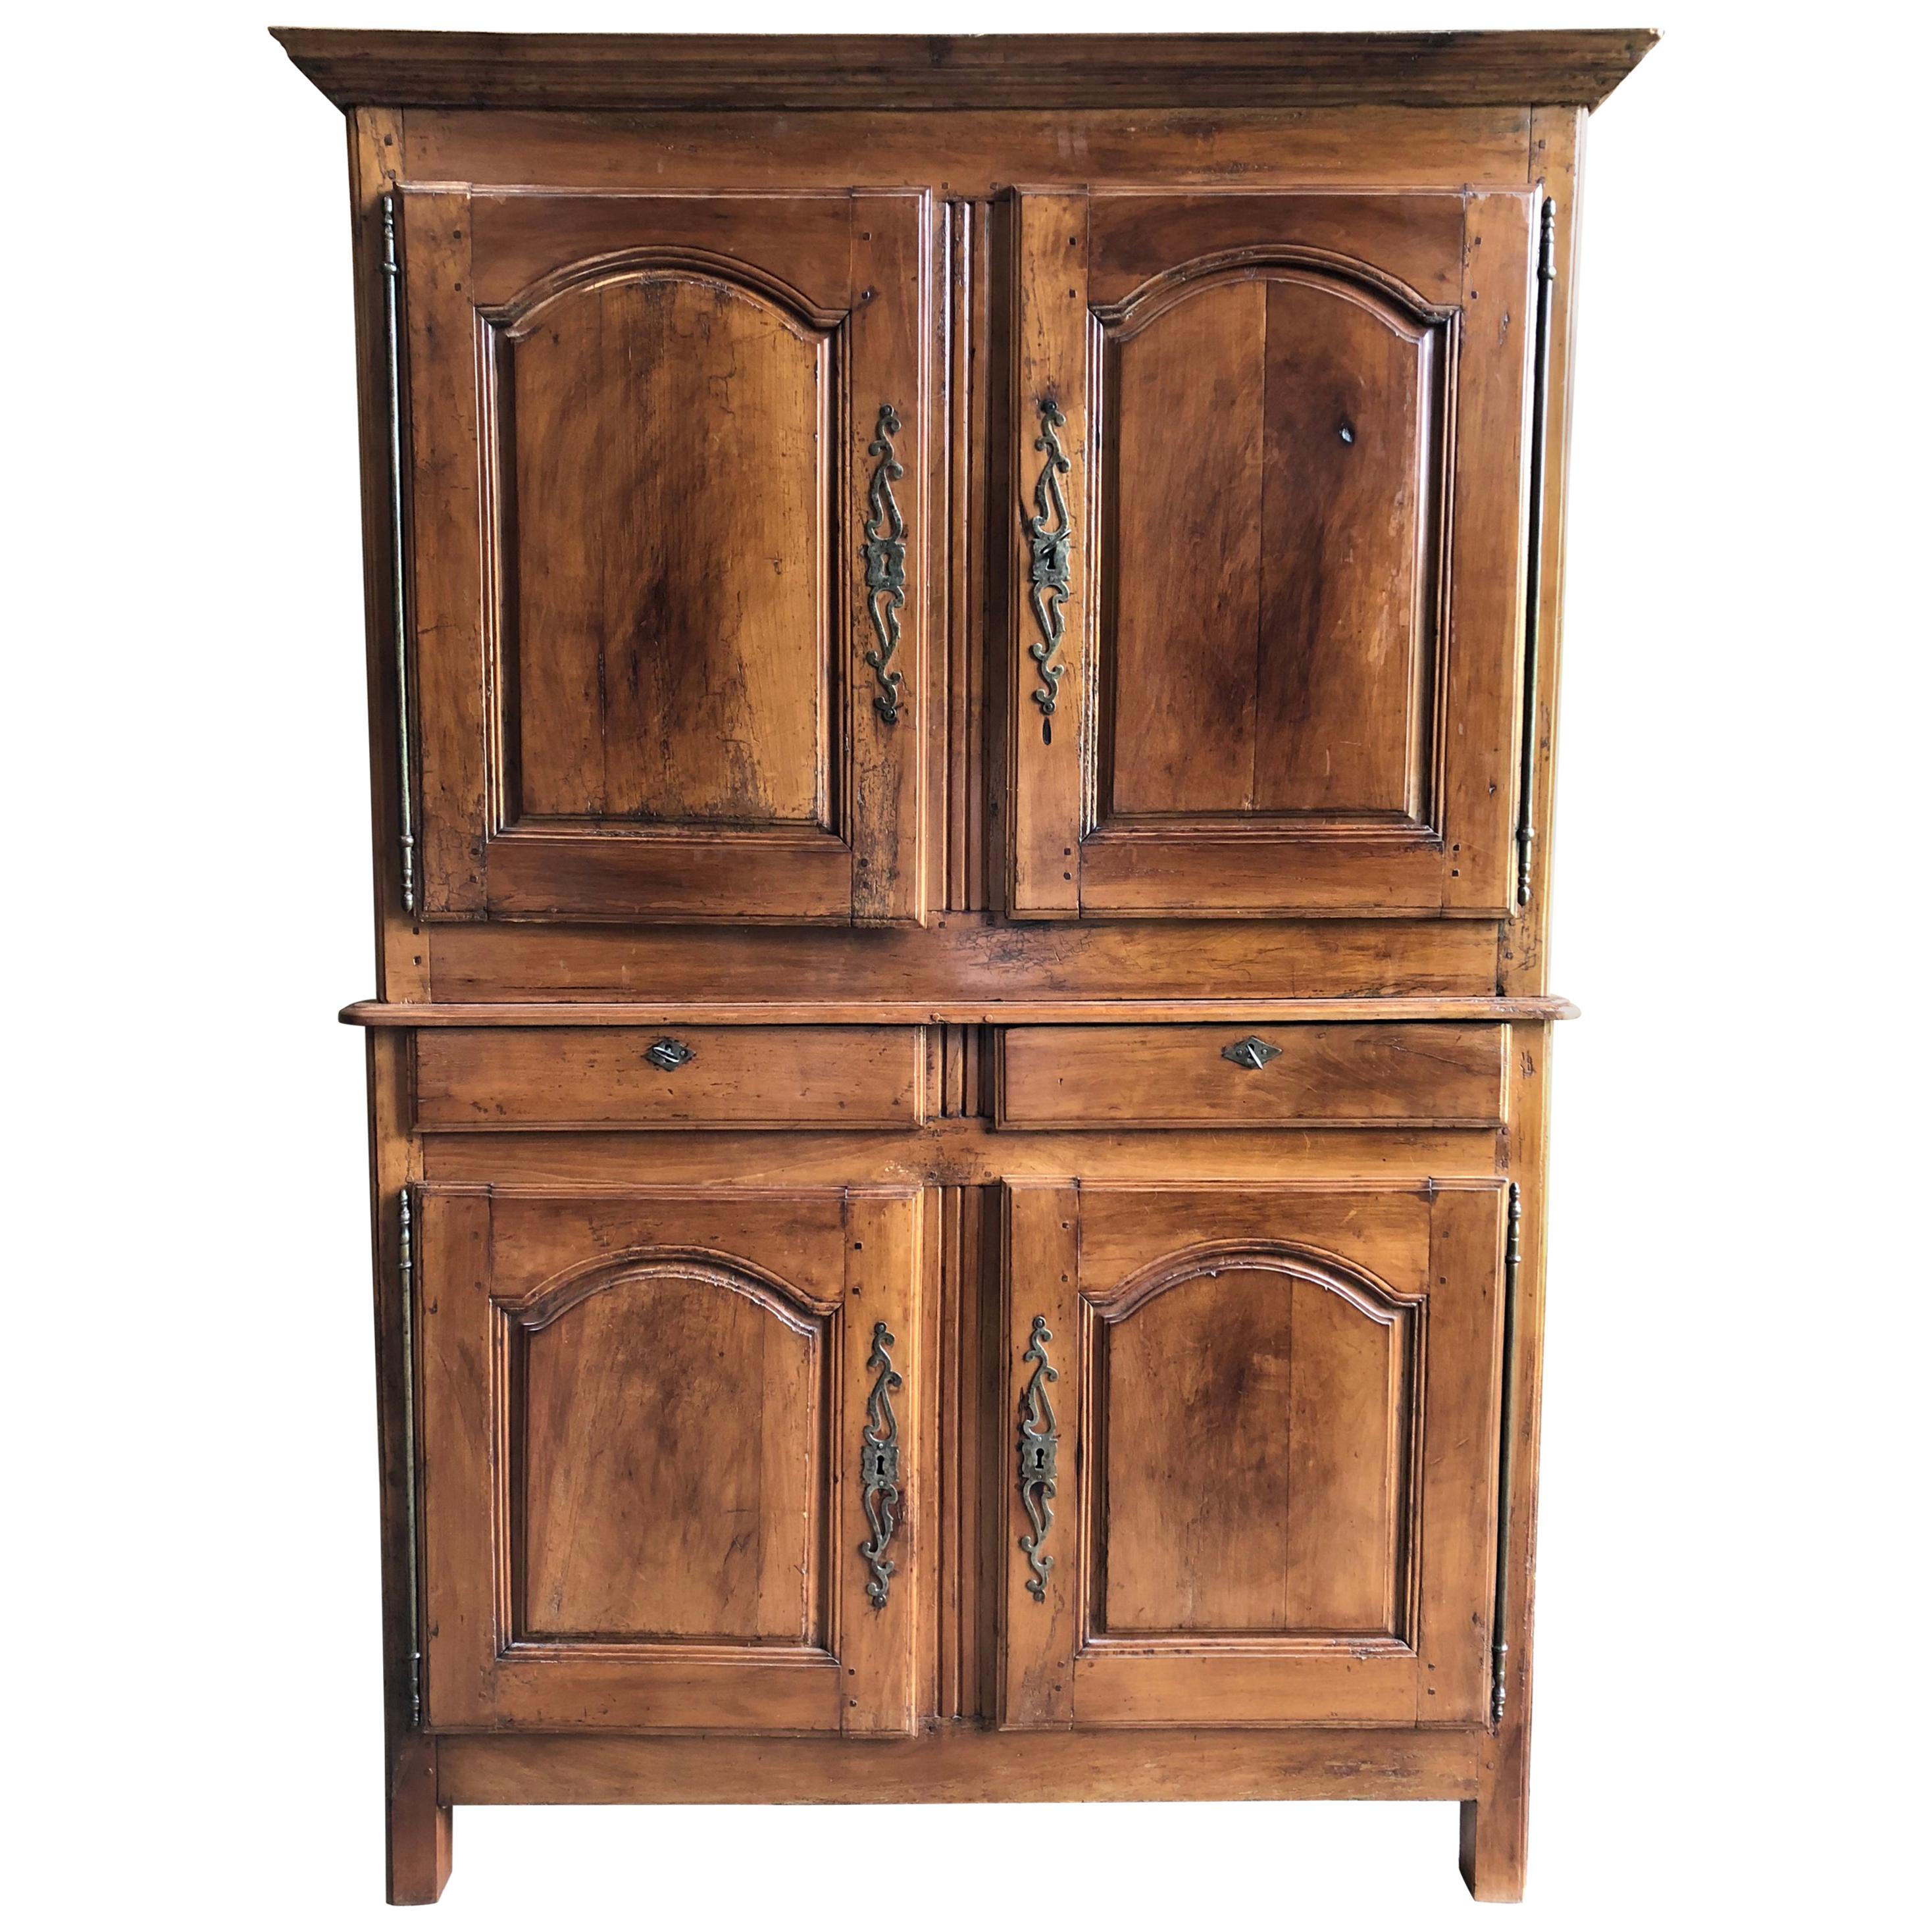 Louis XV Period Buffet a Deux Corps, in Cherry